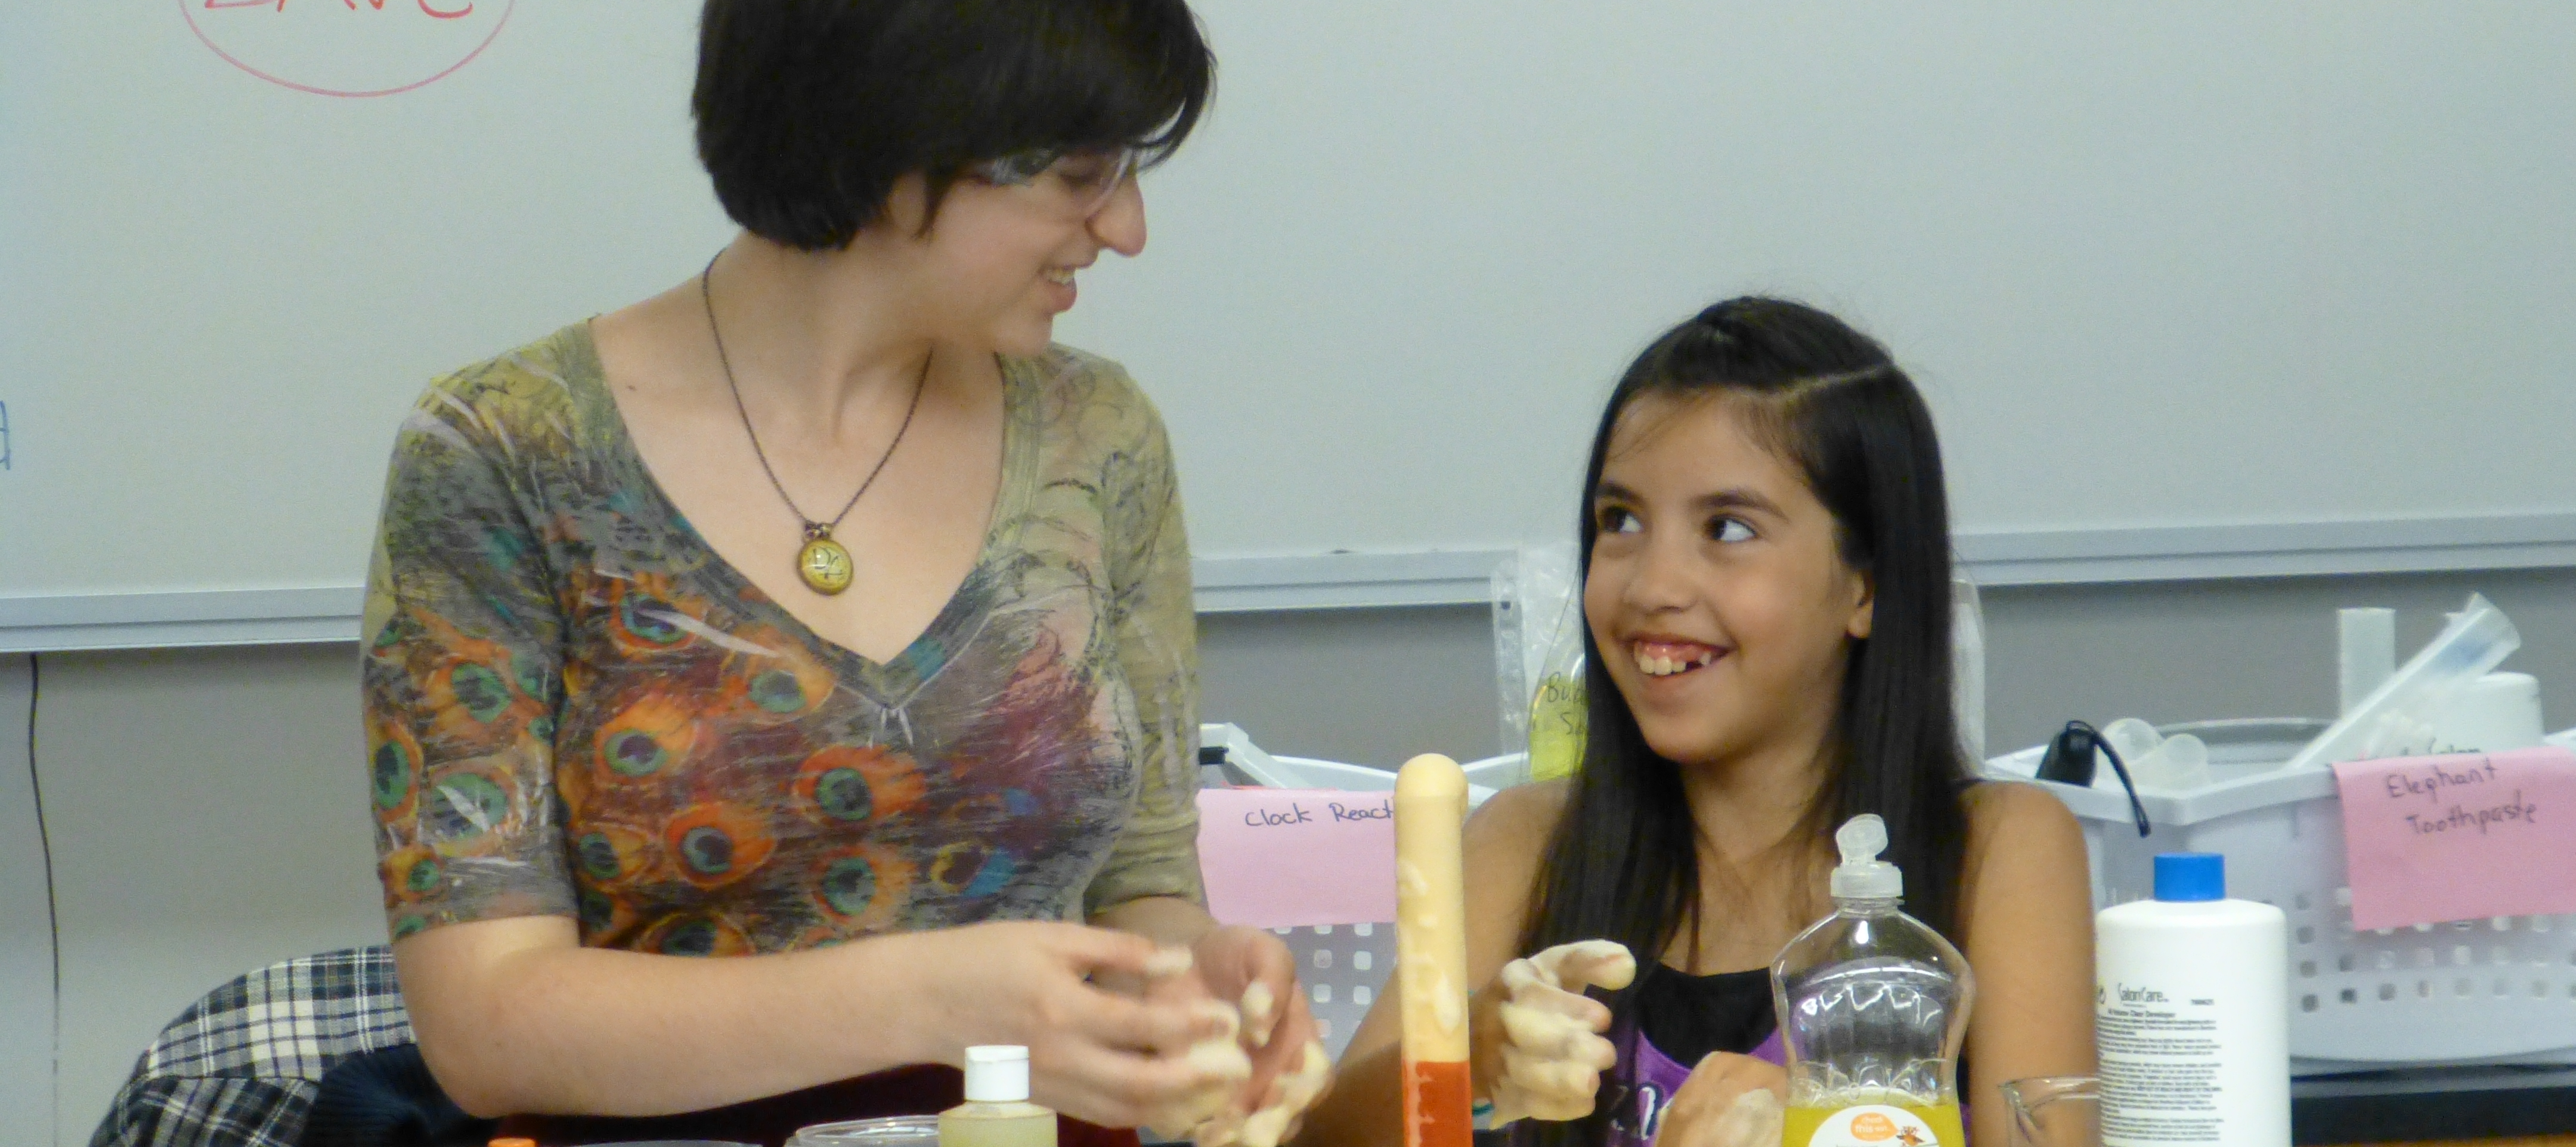 Reed student explores chemical reactions with an elementary student.